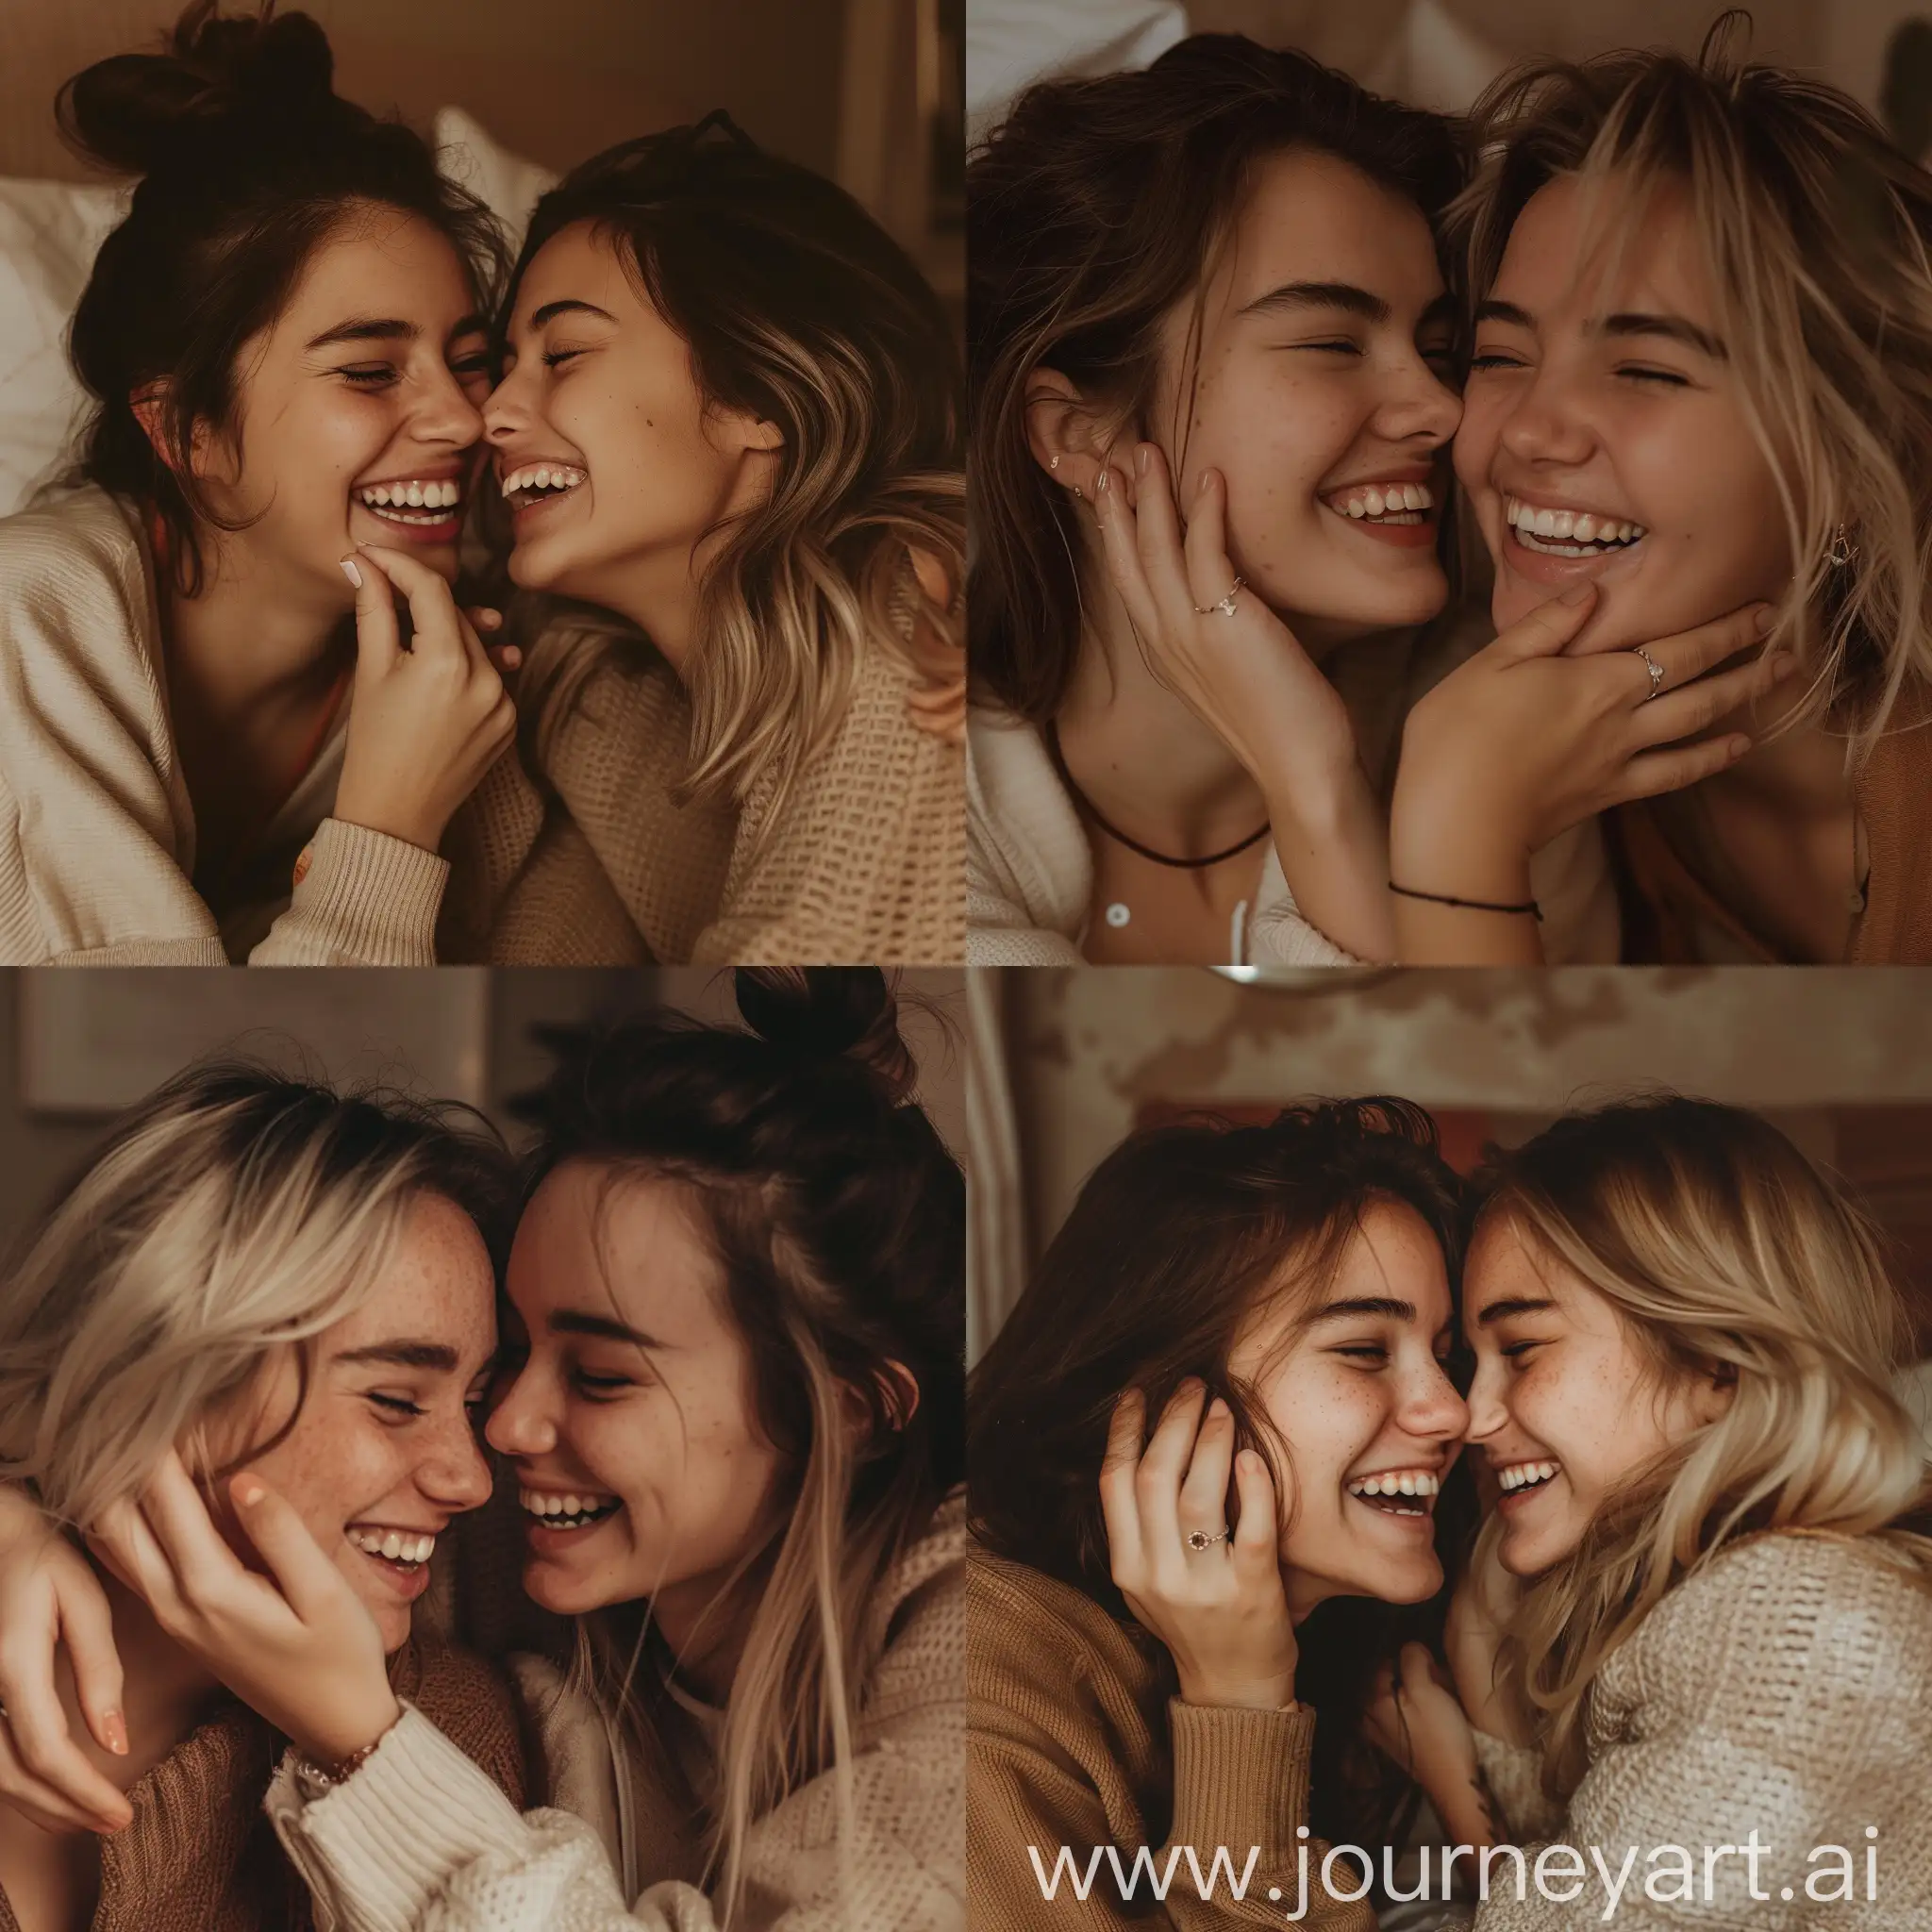 Intimate-Moment-of-Joy-Best-Friends-Sharing-Laughter-in-Soft-Bedroom-Tones